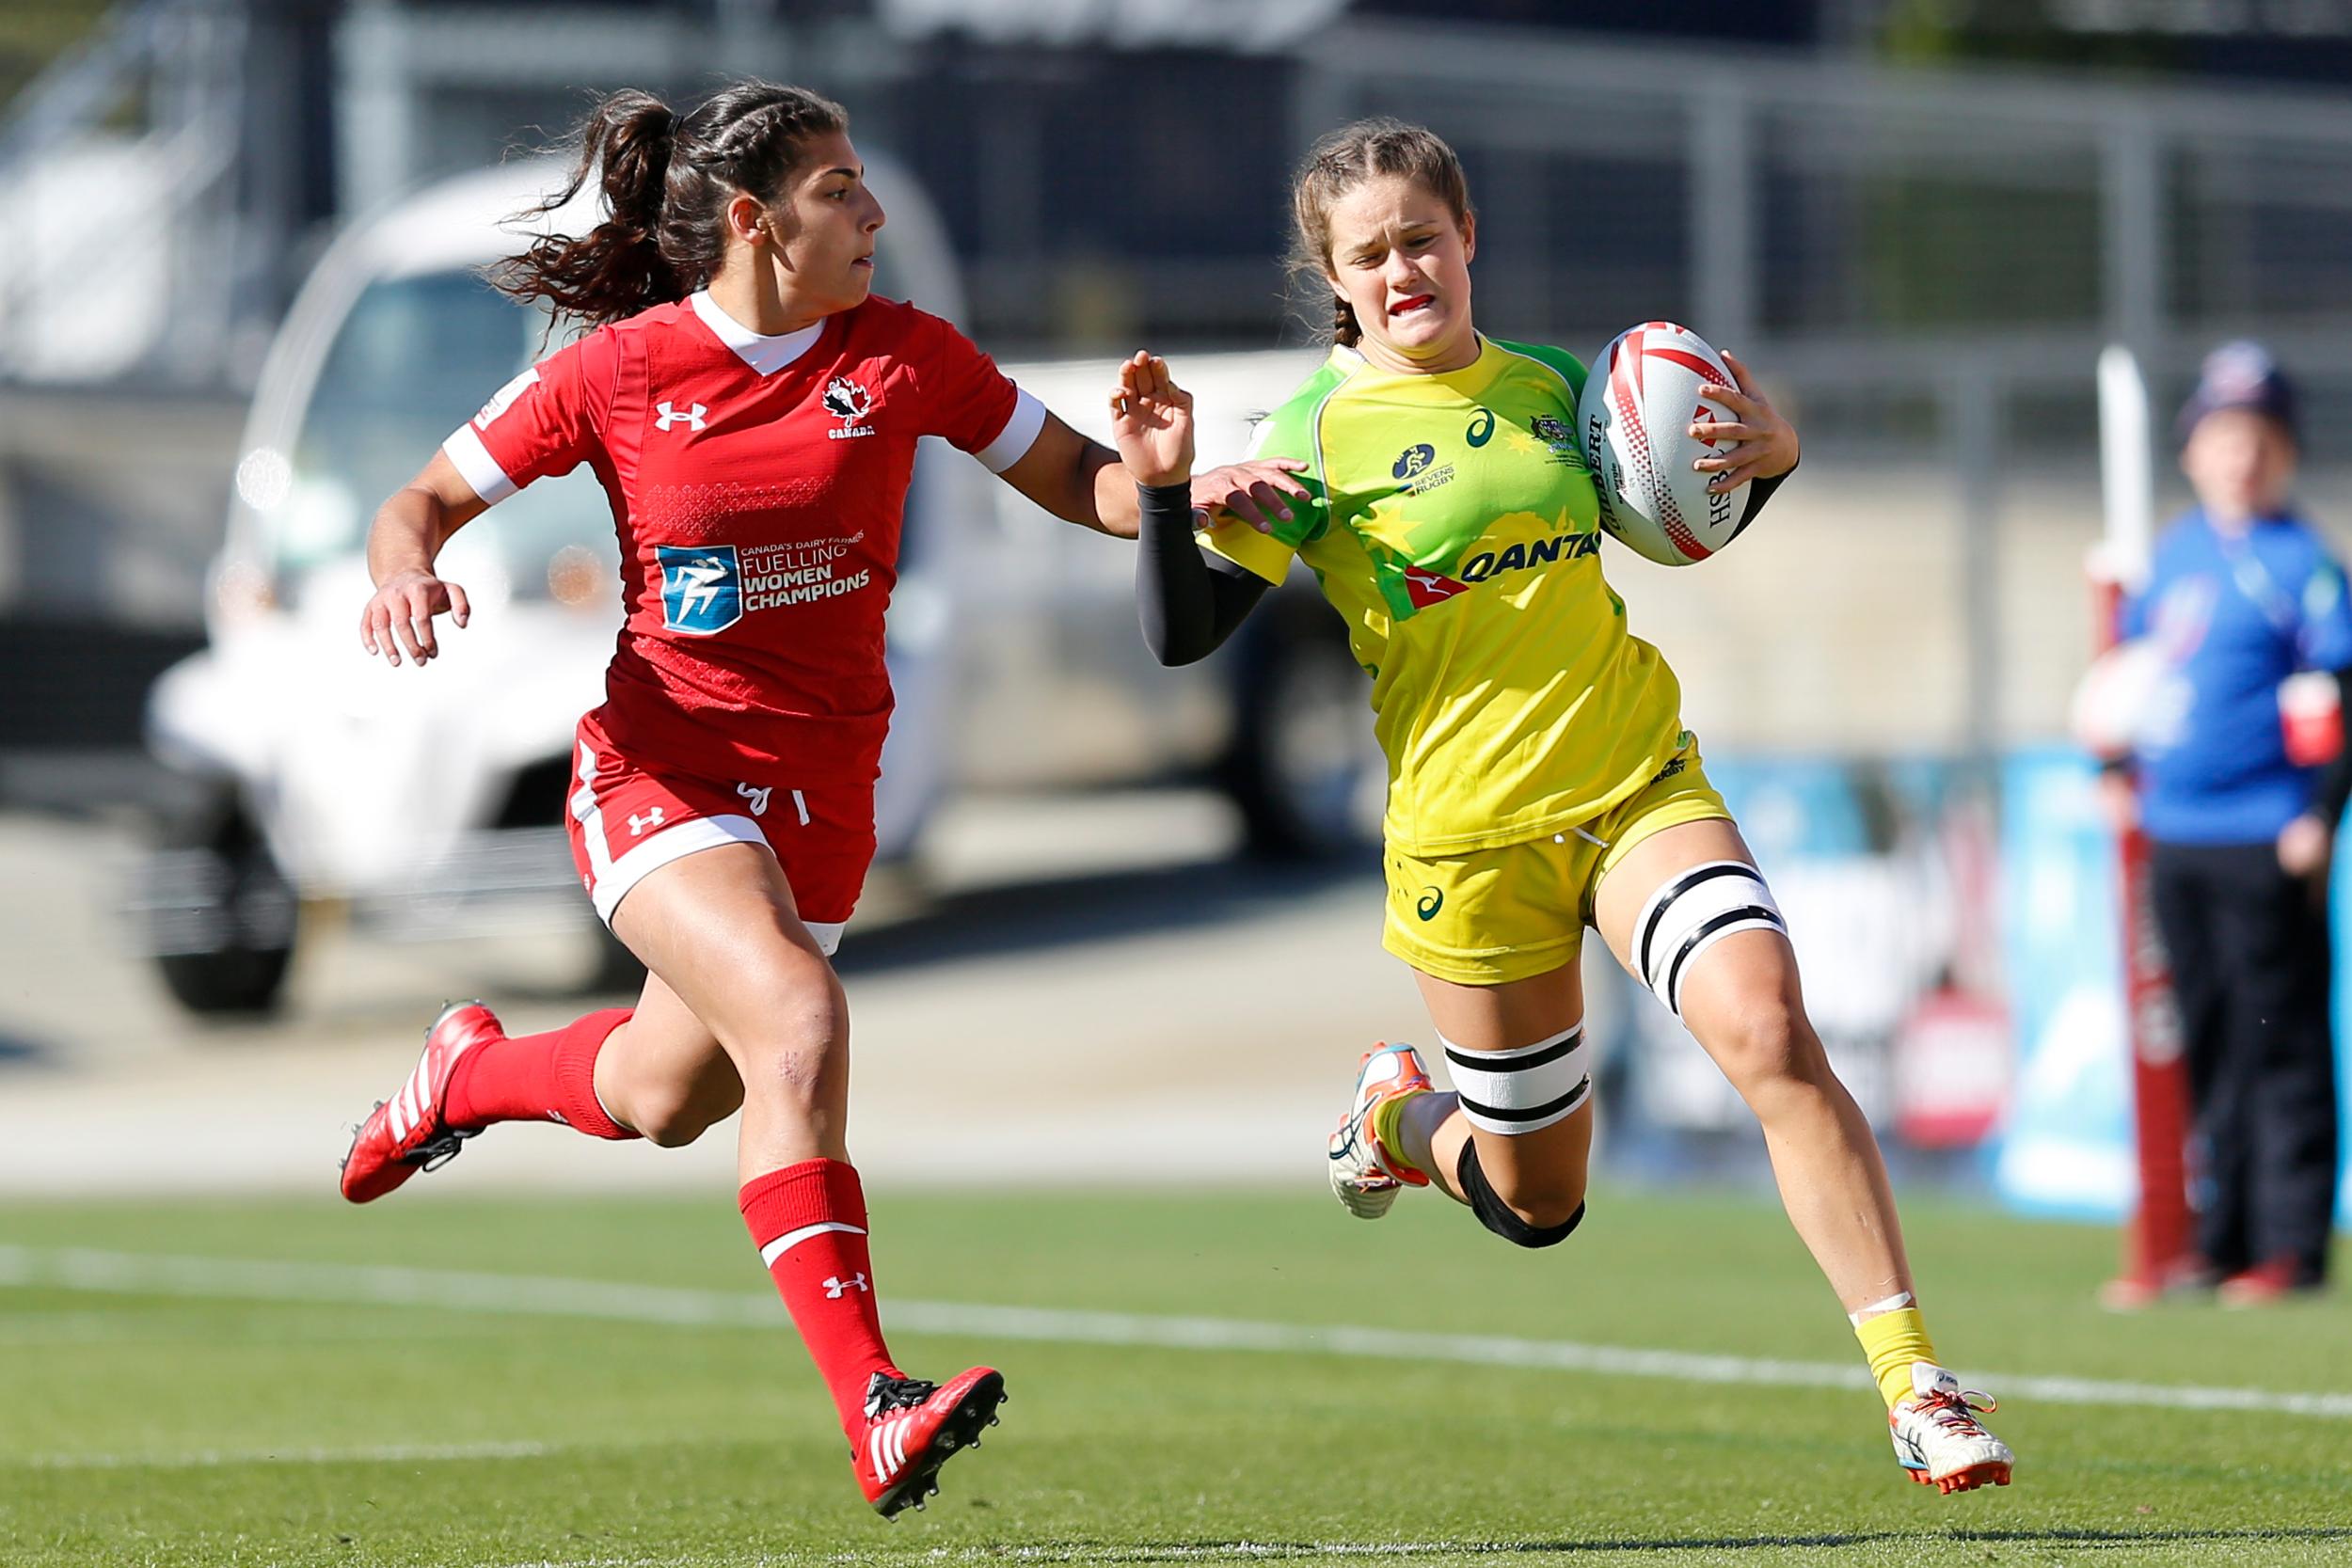 Bianca Farella in pursuit as Australia descends the field to score a try at Atlanta 7s (Photo: Mike Lee @ KLC Fotos).